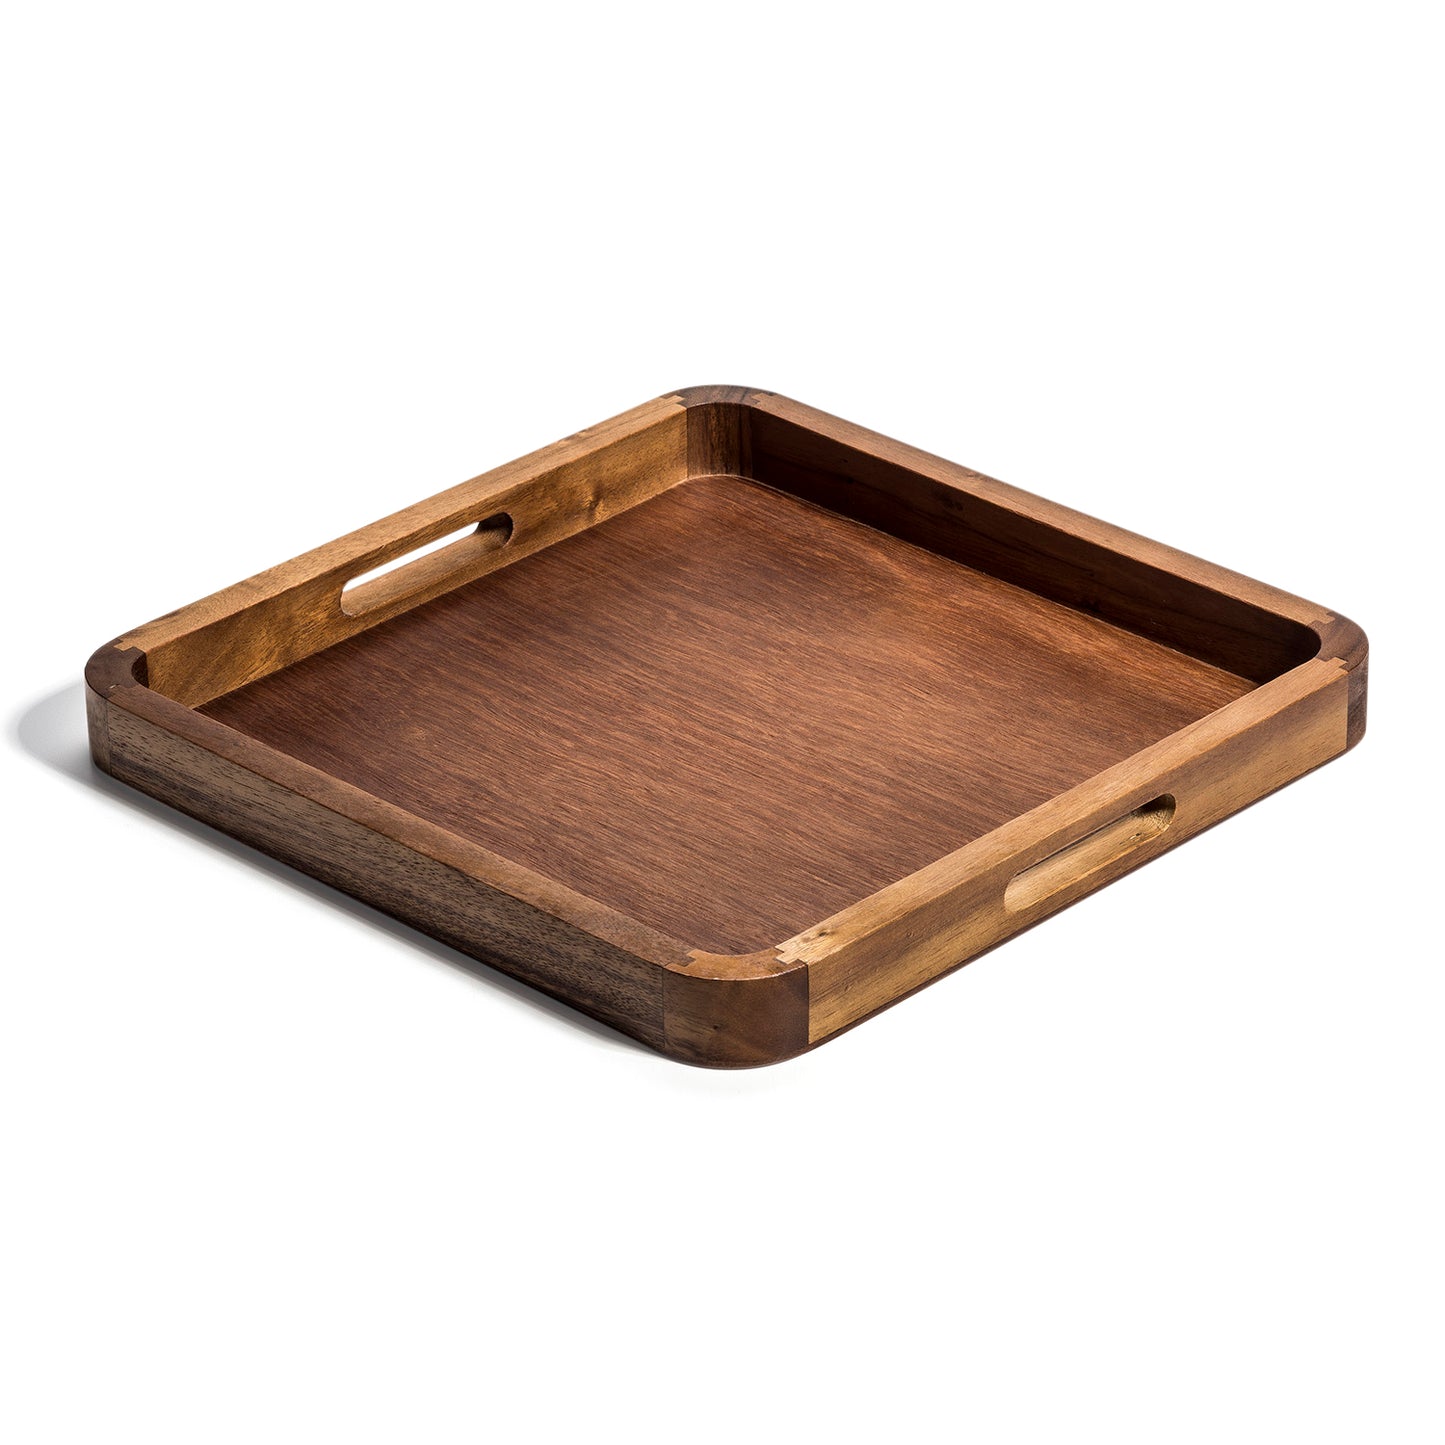 Aalorg Square Serving Tray - BagLunchproduct,corp